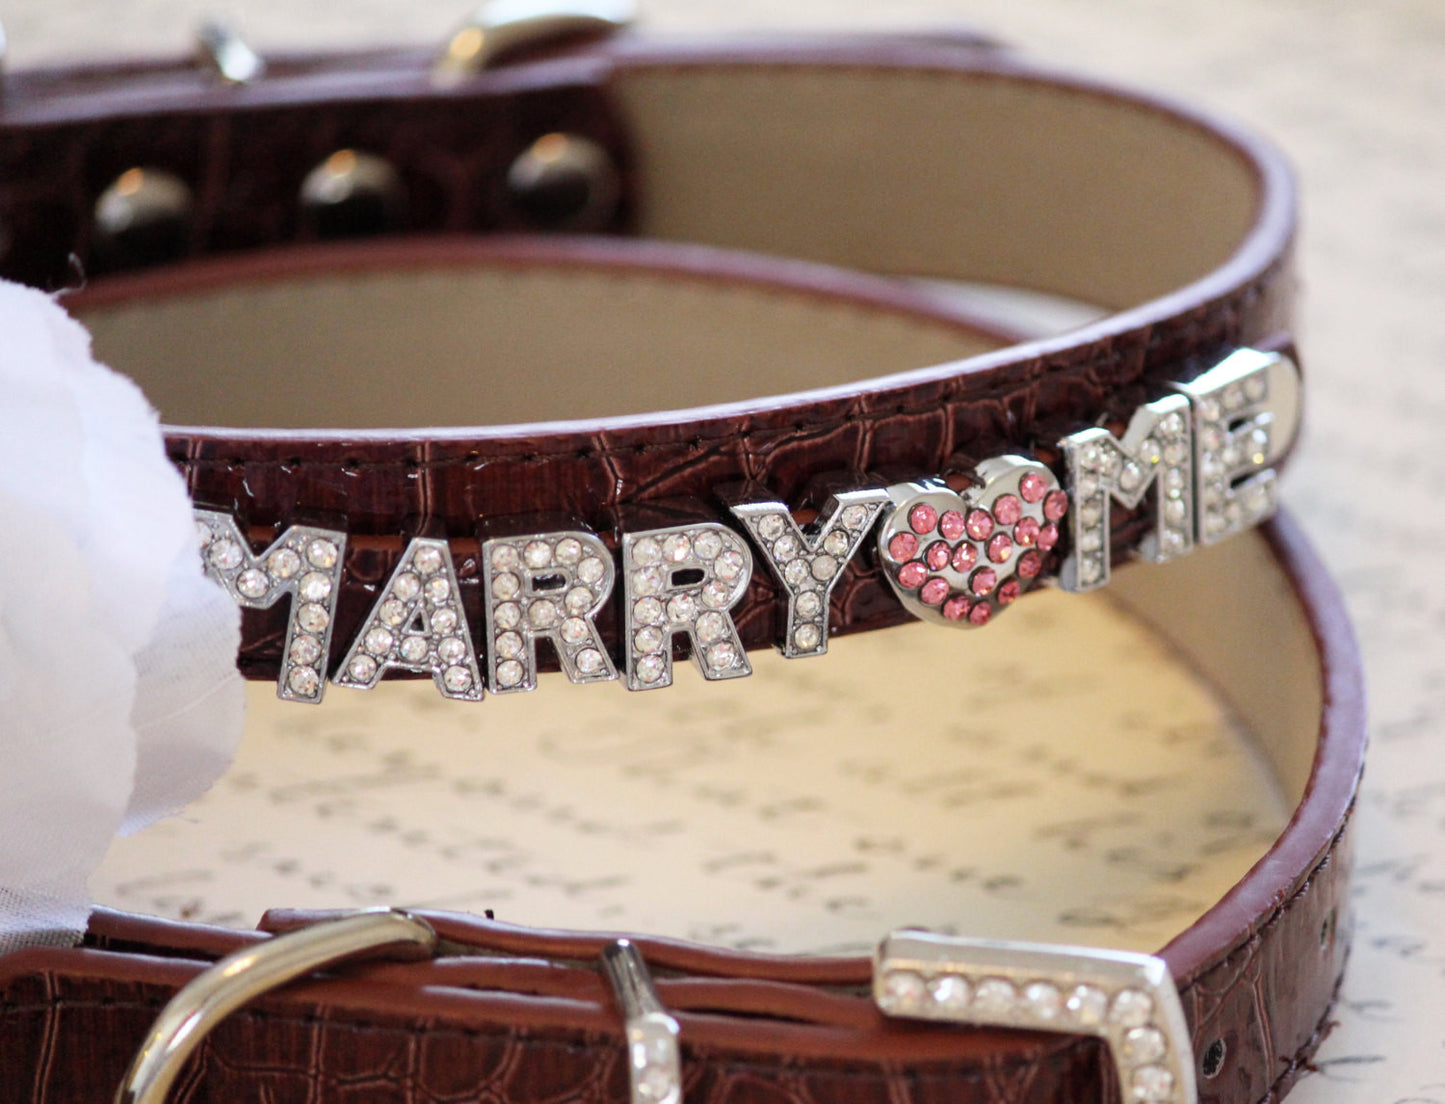 MARRY ME, Dog Collar, Brown Leather dog Collar with Marry me letters and white Flower ,Proposal Idea , Wedding dog collar